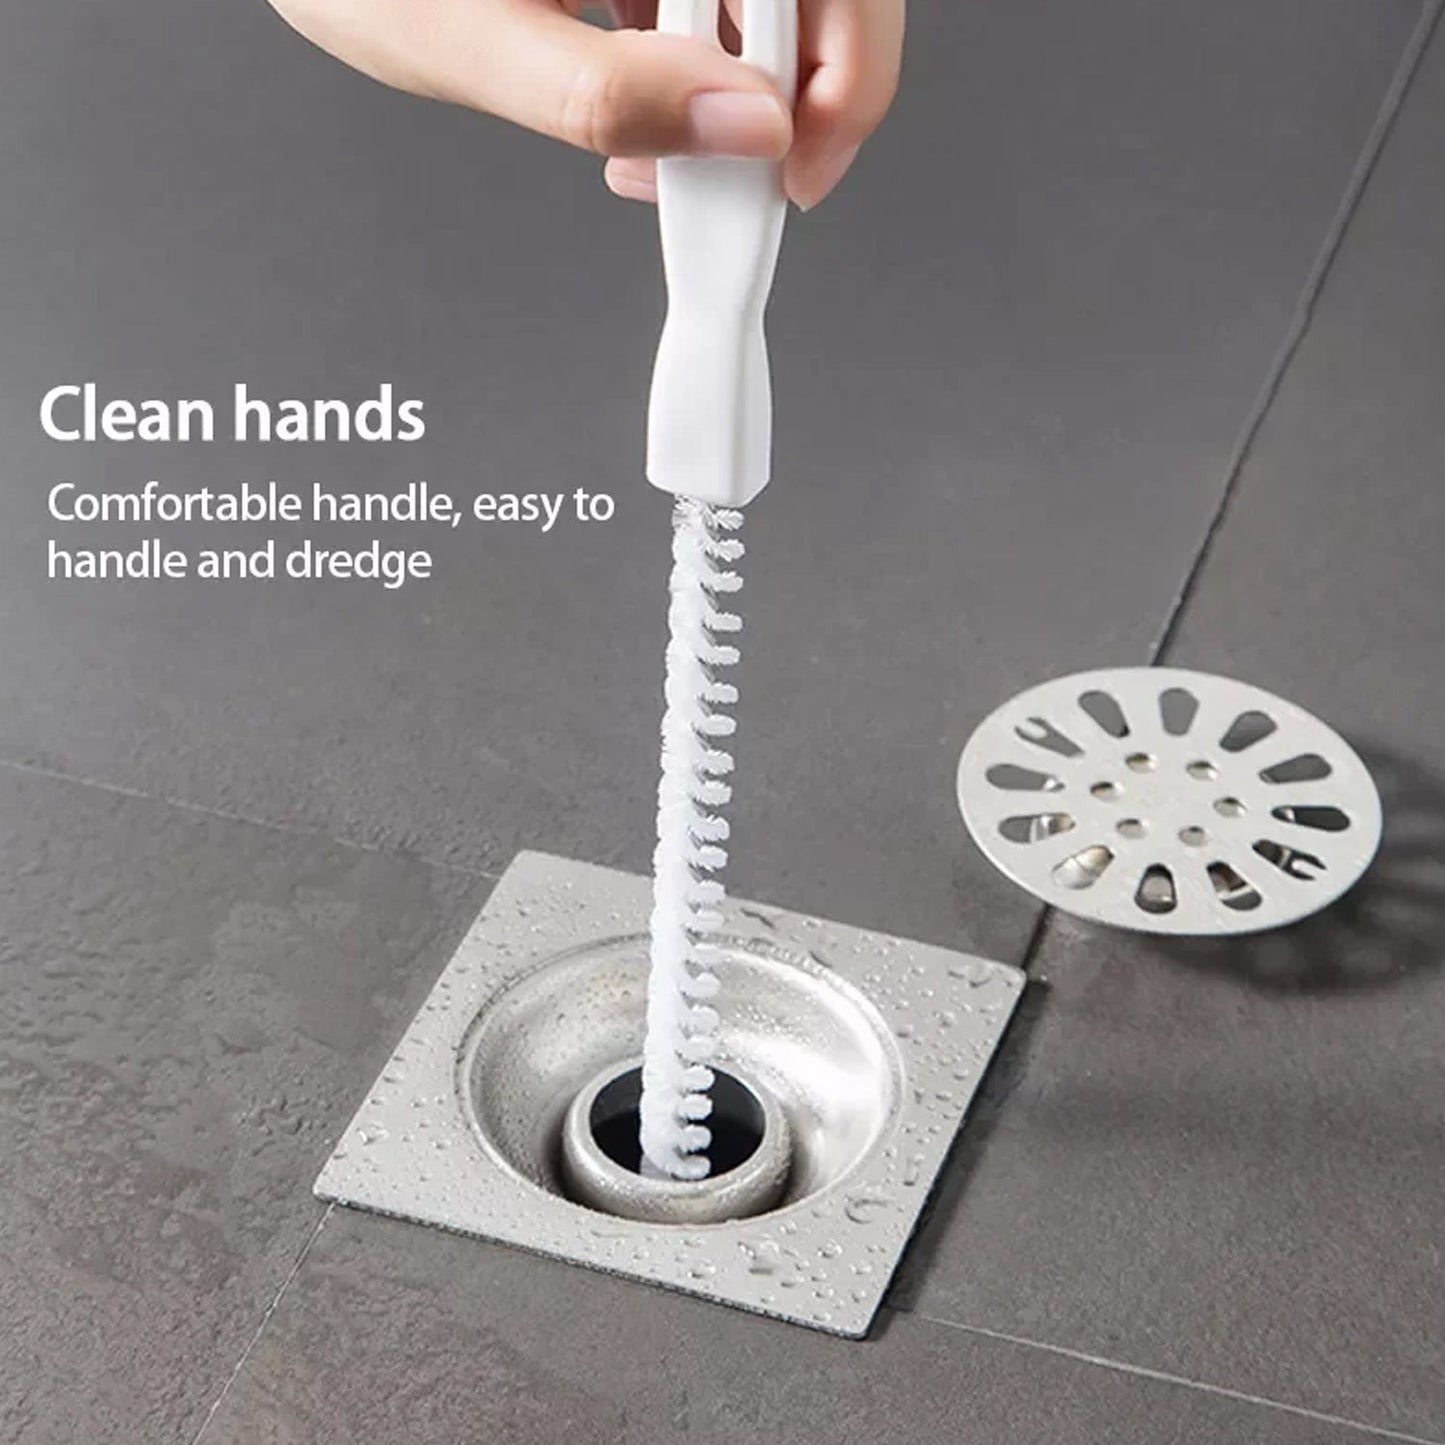 Sewer Dredging Tool, Sink Drain Overflow Cleaning Brush, Household Sewer Hair Catcher, Reusable Drain Cleaner Hair Clog Remover